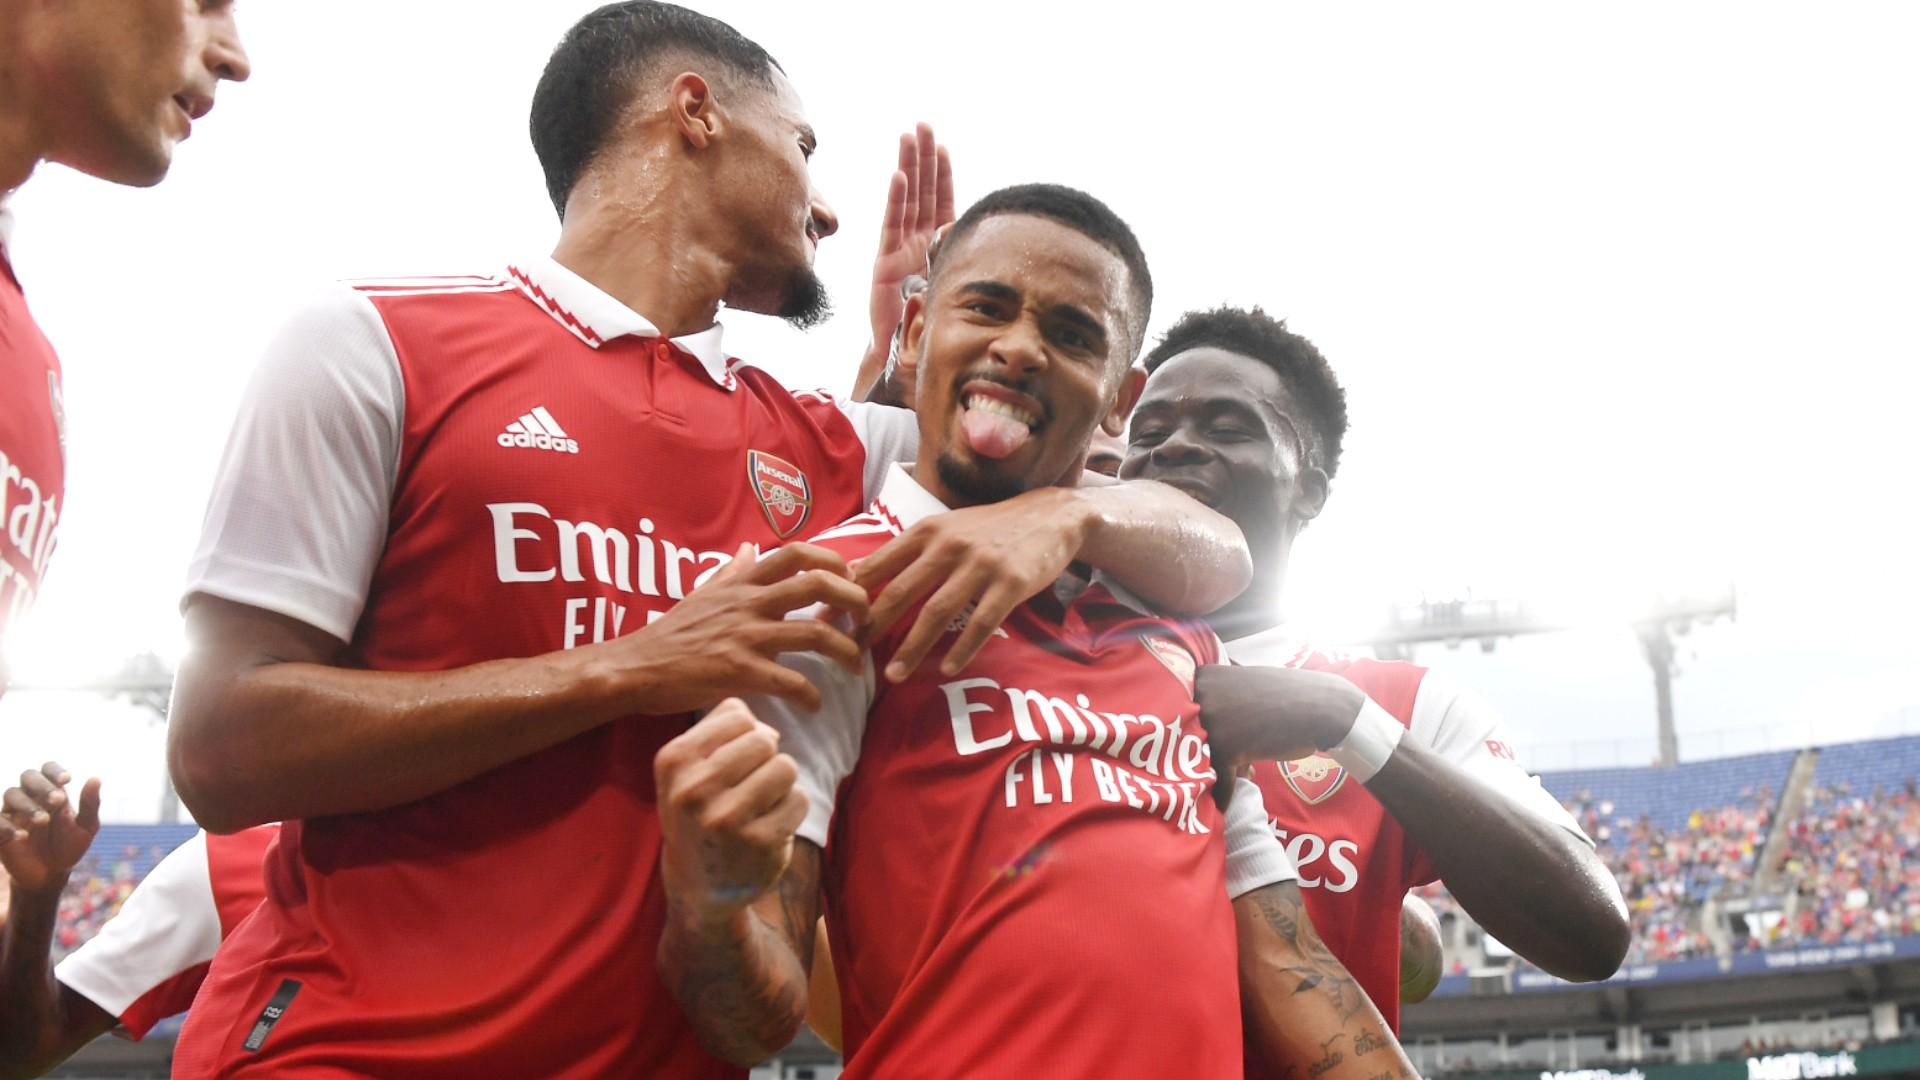 Arsenal Vs. Leicester City Result, Score: Gabriel Jesus Gets Two Goals, Two Assists In Dominant 4 2 Gunners Win. Sporting News United Kingdom